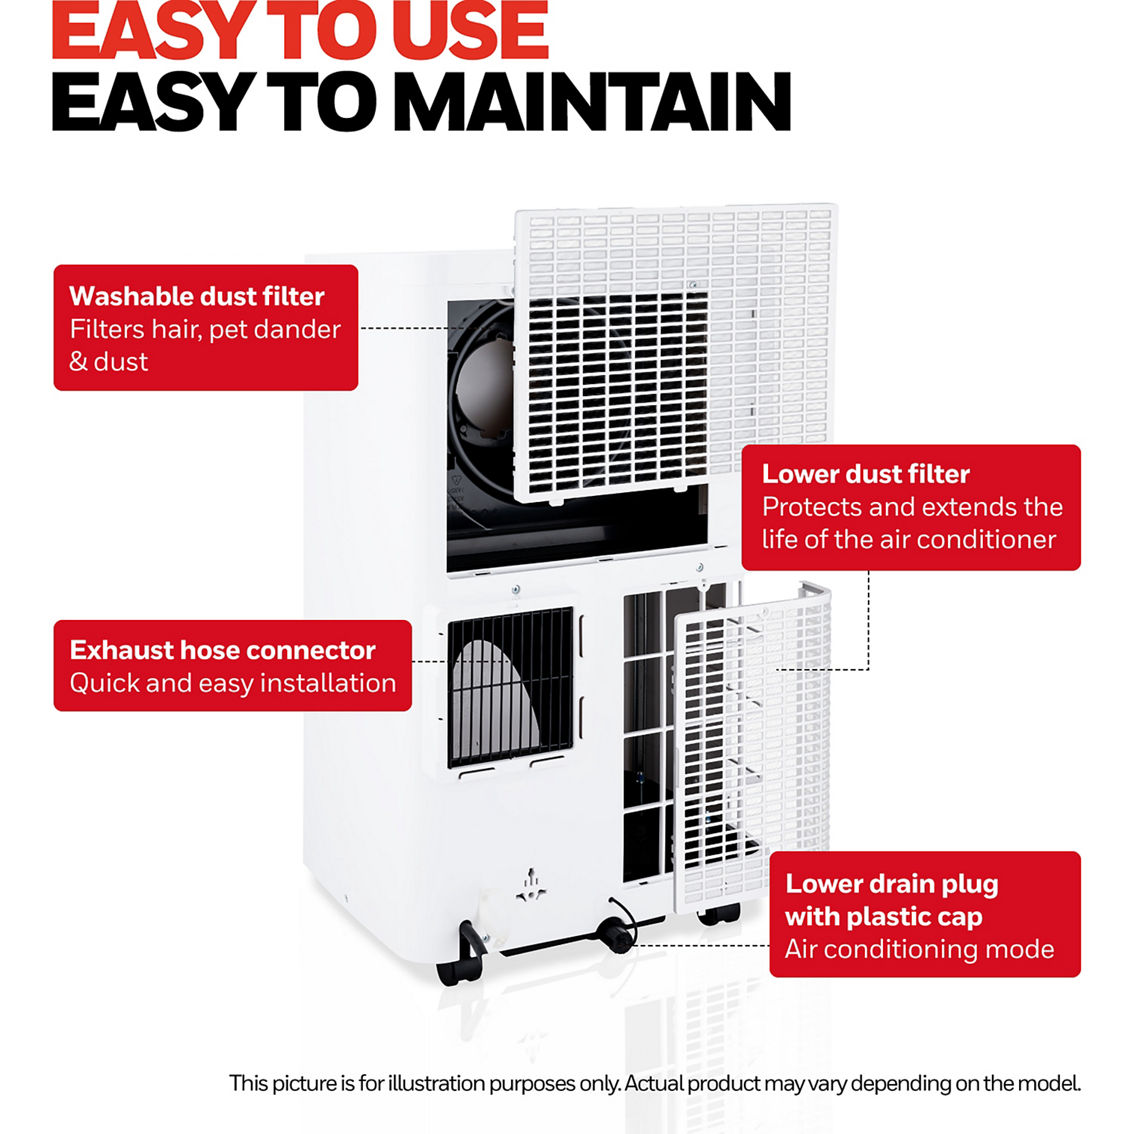 Honeywell 12,000 BTU Portable Air Condition with Dehumidifier and Fan in White - Image 3 of 9